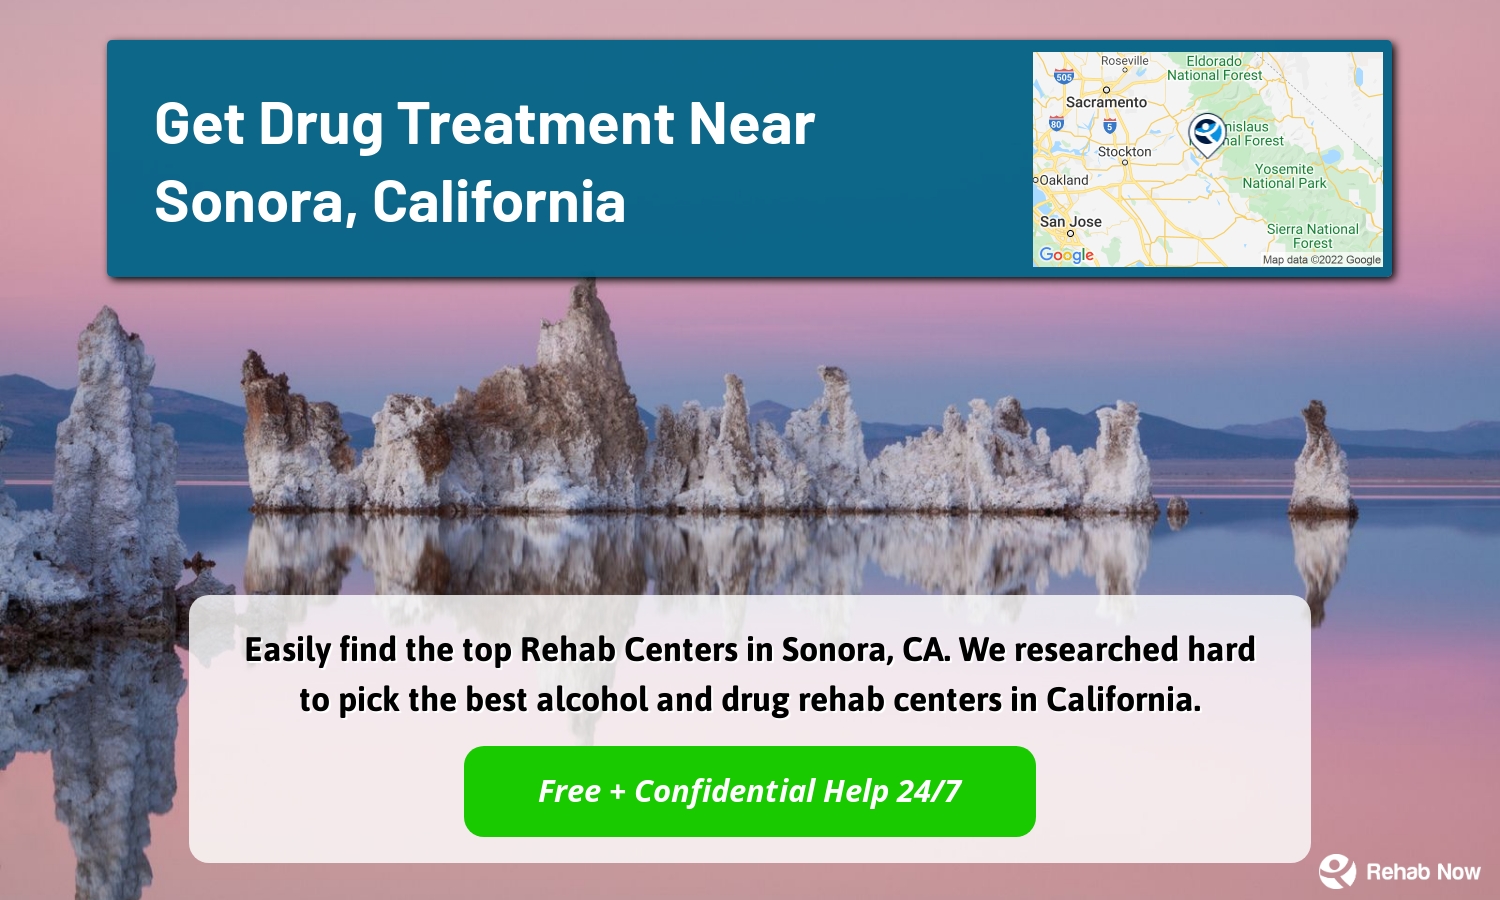 Easily find the top Rehab Centers in Sonora, CA. We researched hard to pick the best alcohol and drug rehab centers in California.